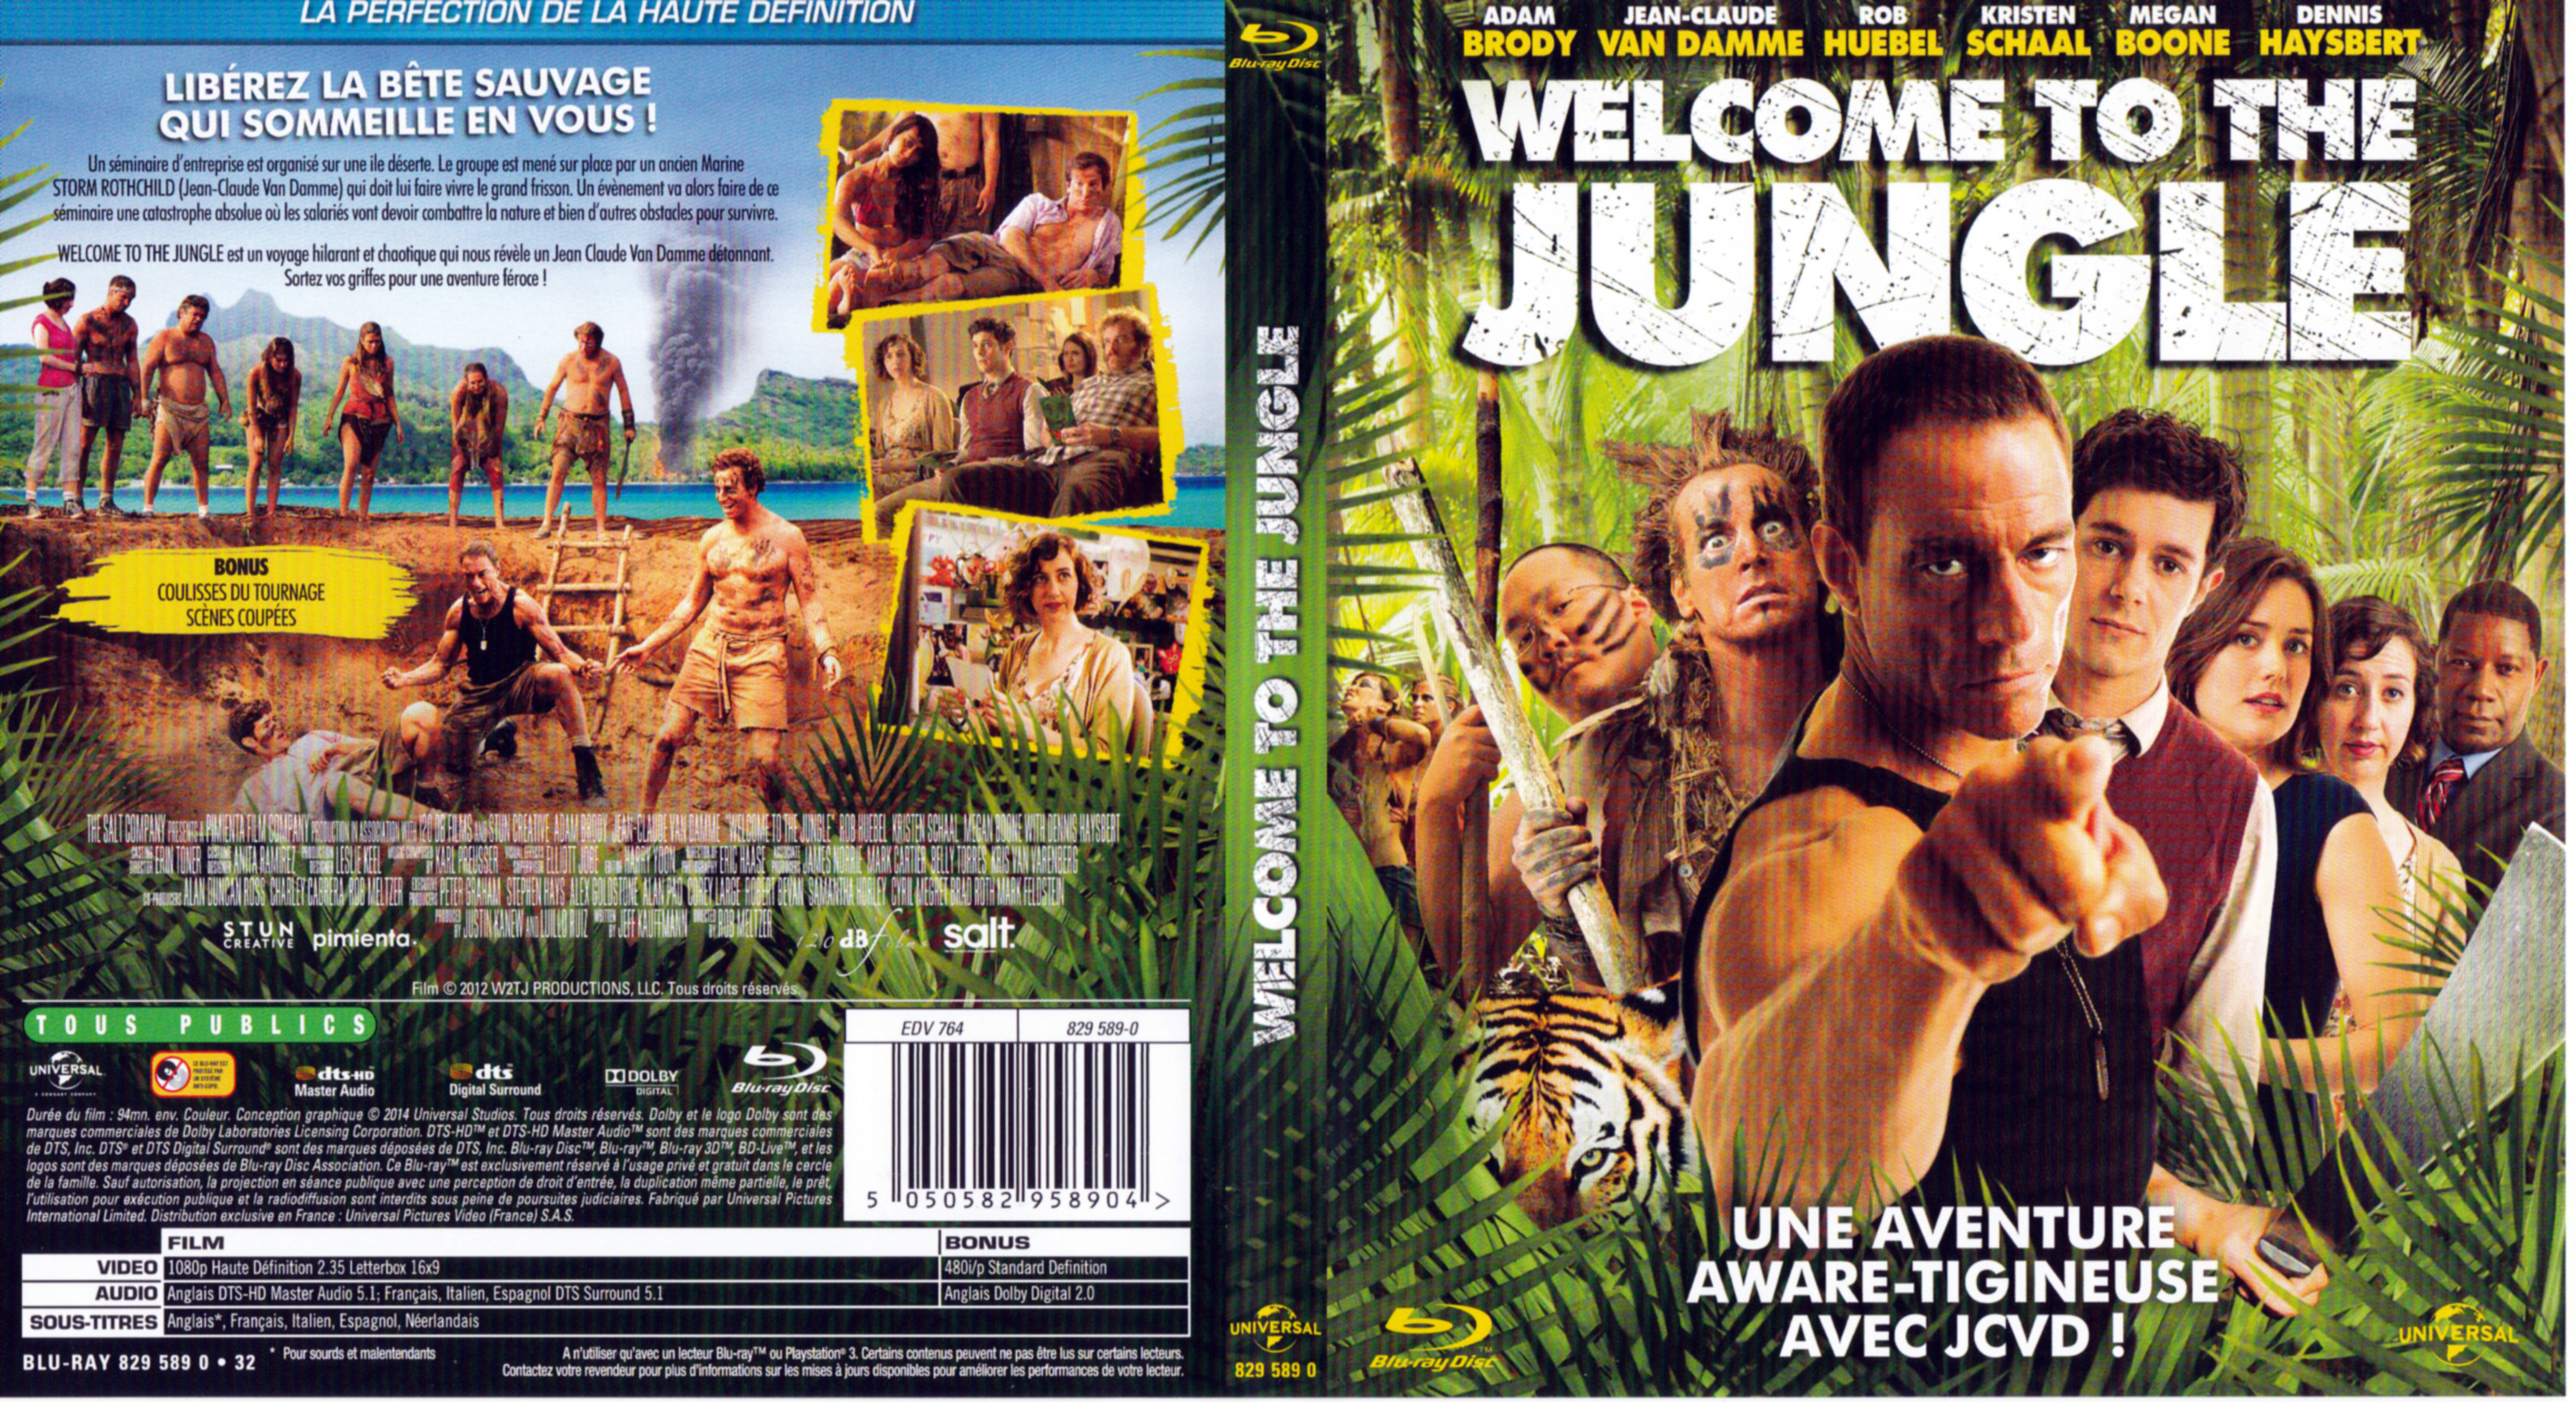 Jaquette DVD Welcome to the jungle (2012) (BLU-RAY)